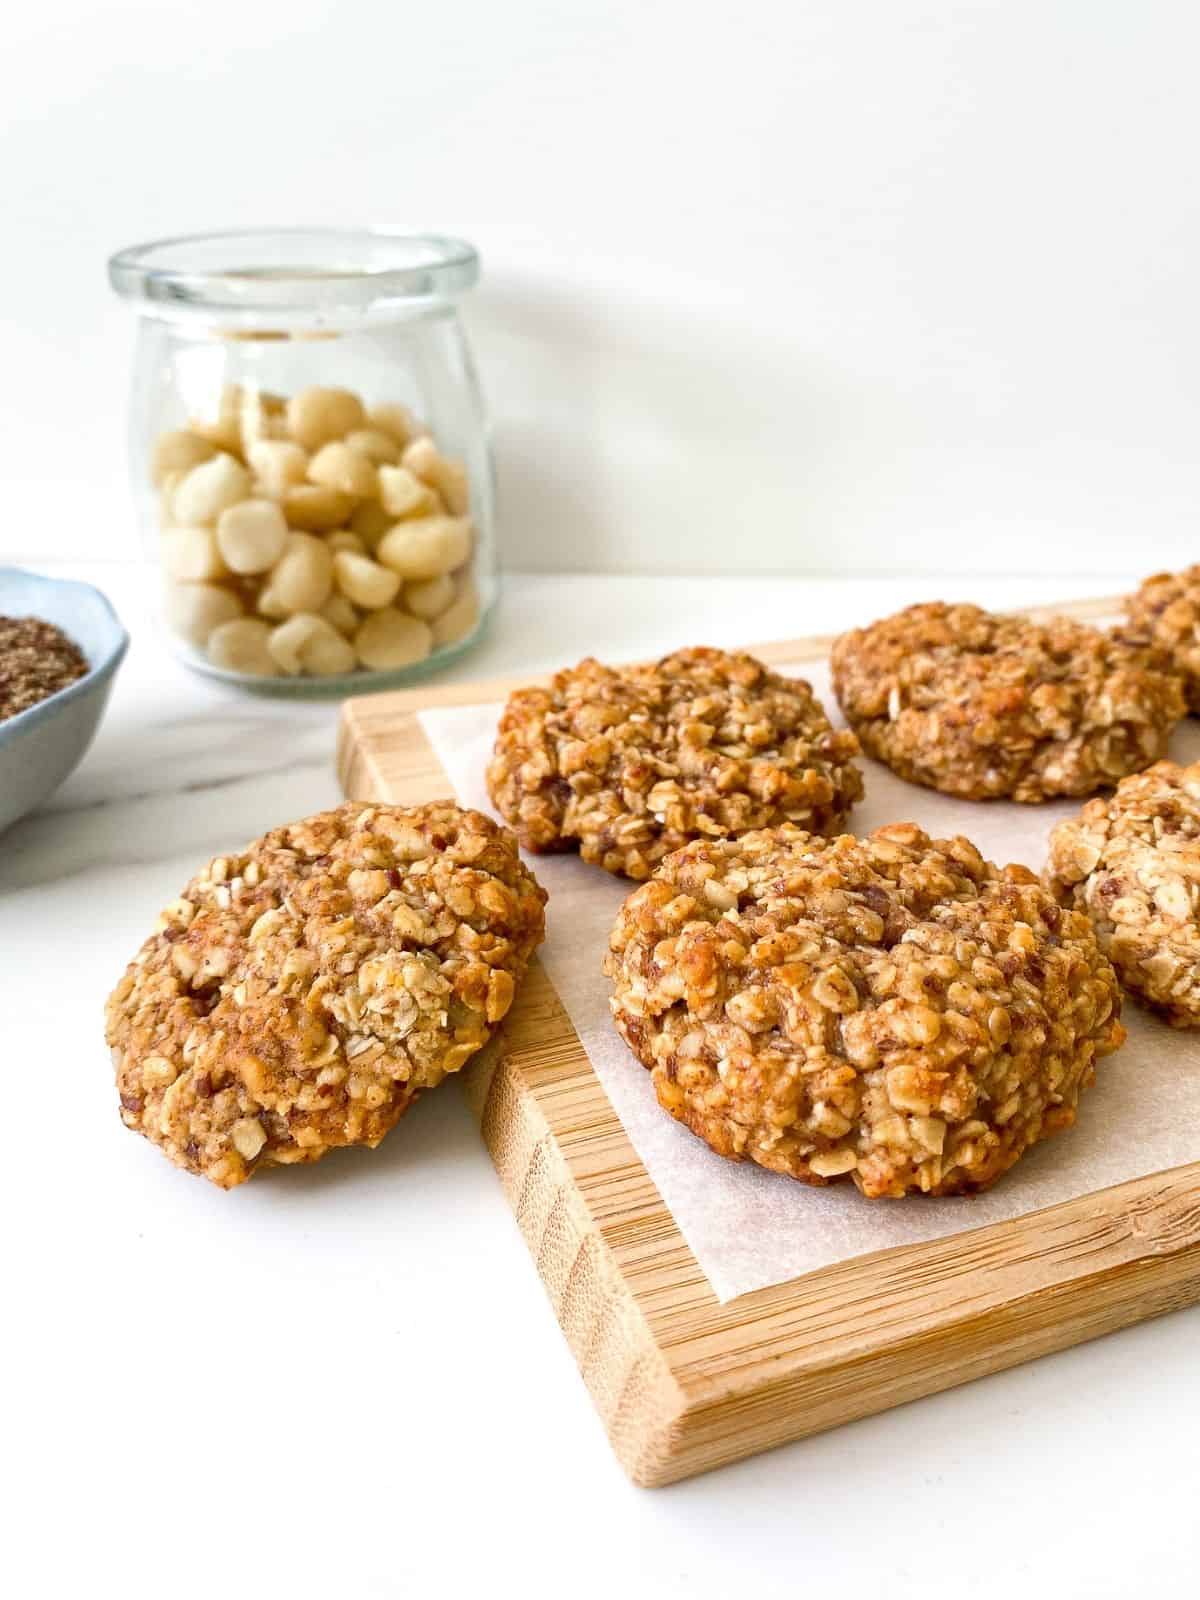 wooden board with coconut macadamia nut oat cookies on it, with a jar of nuts in the background.